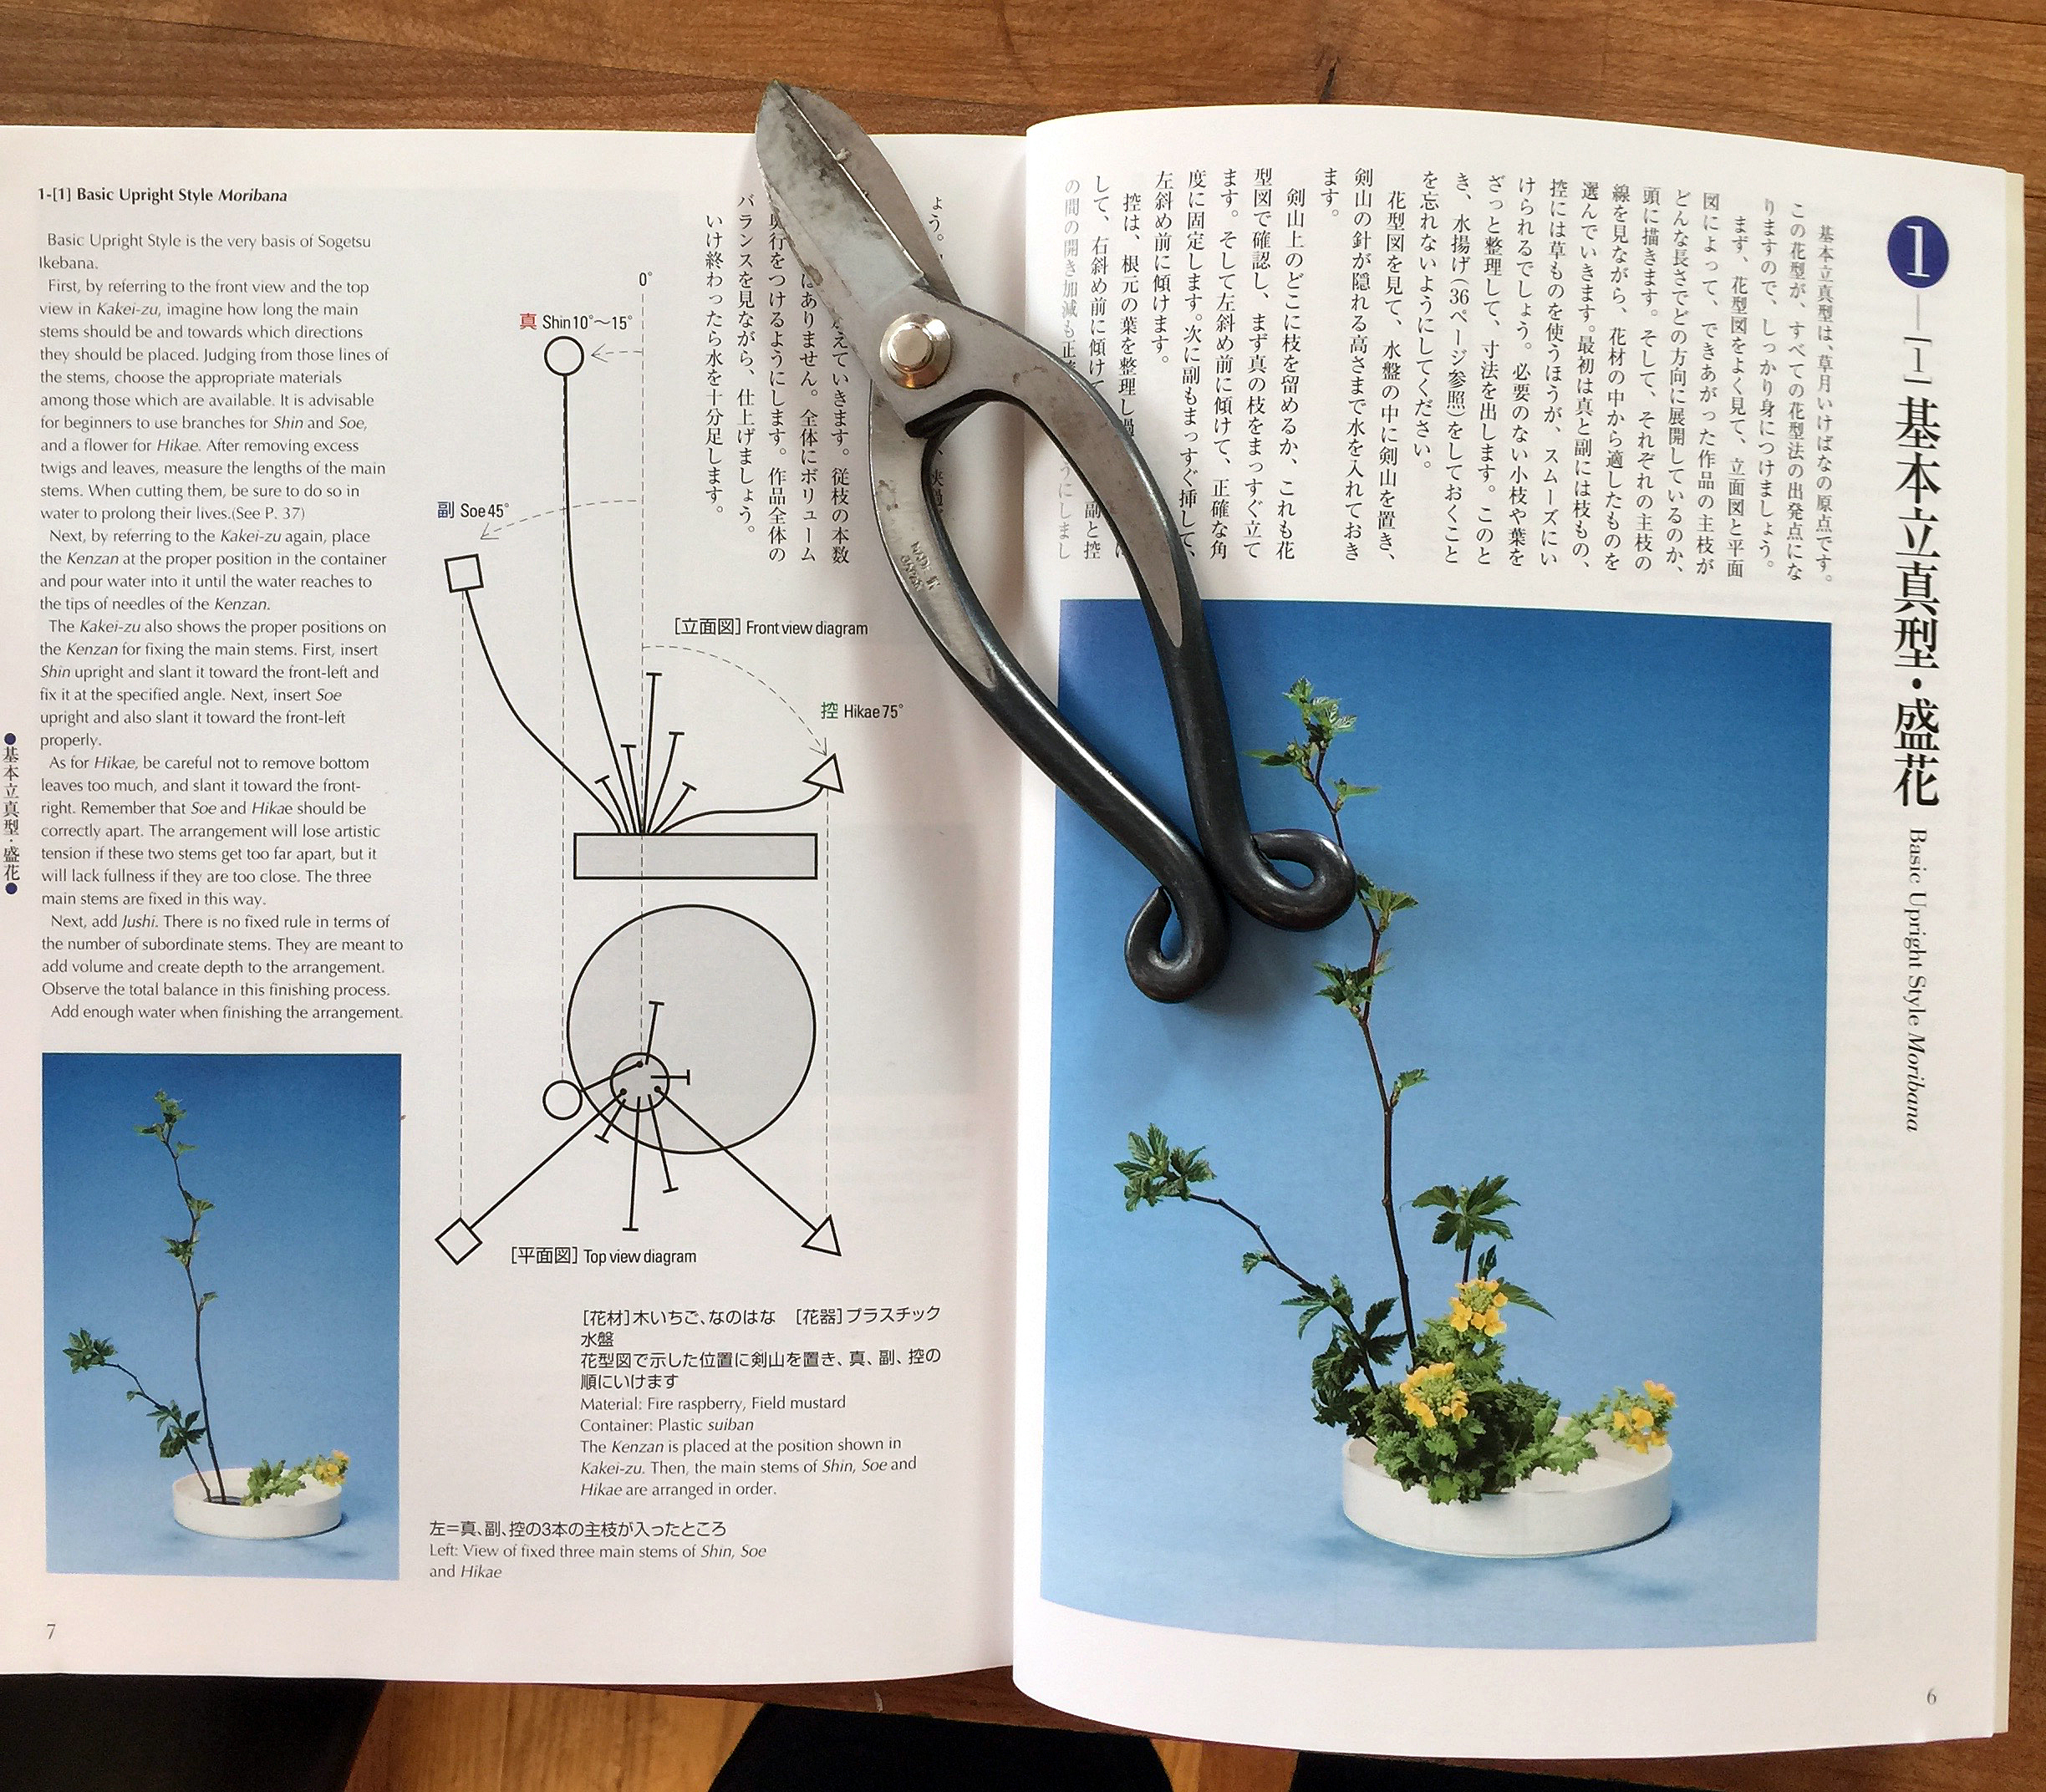 Book 1 Lesson 1 with Marilyn's own Ikebana scissors!